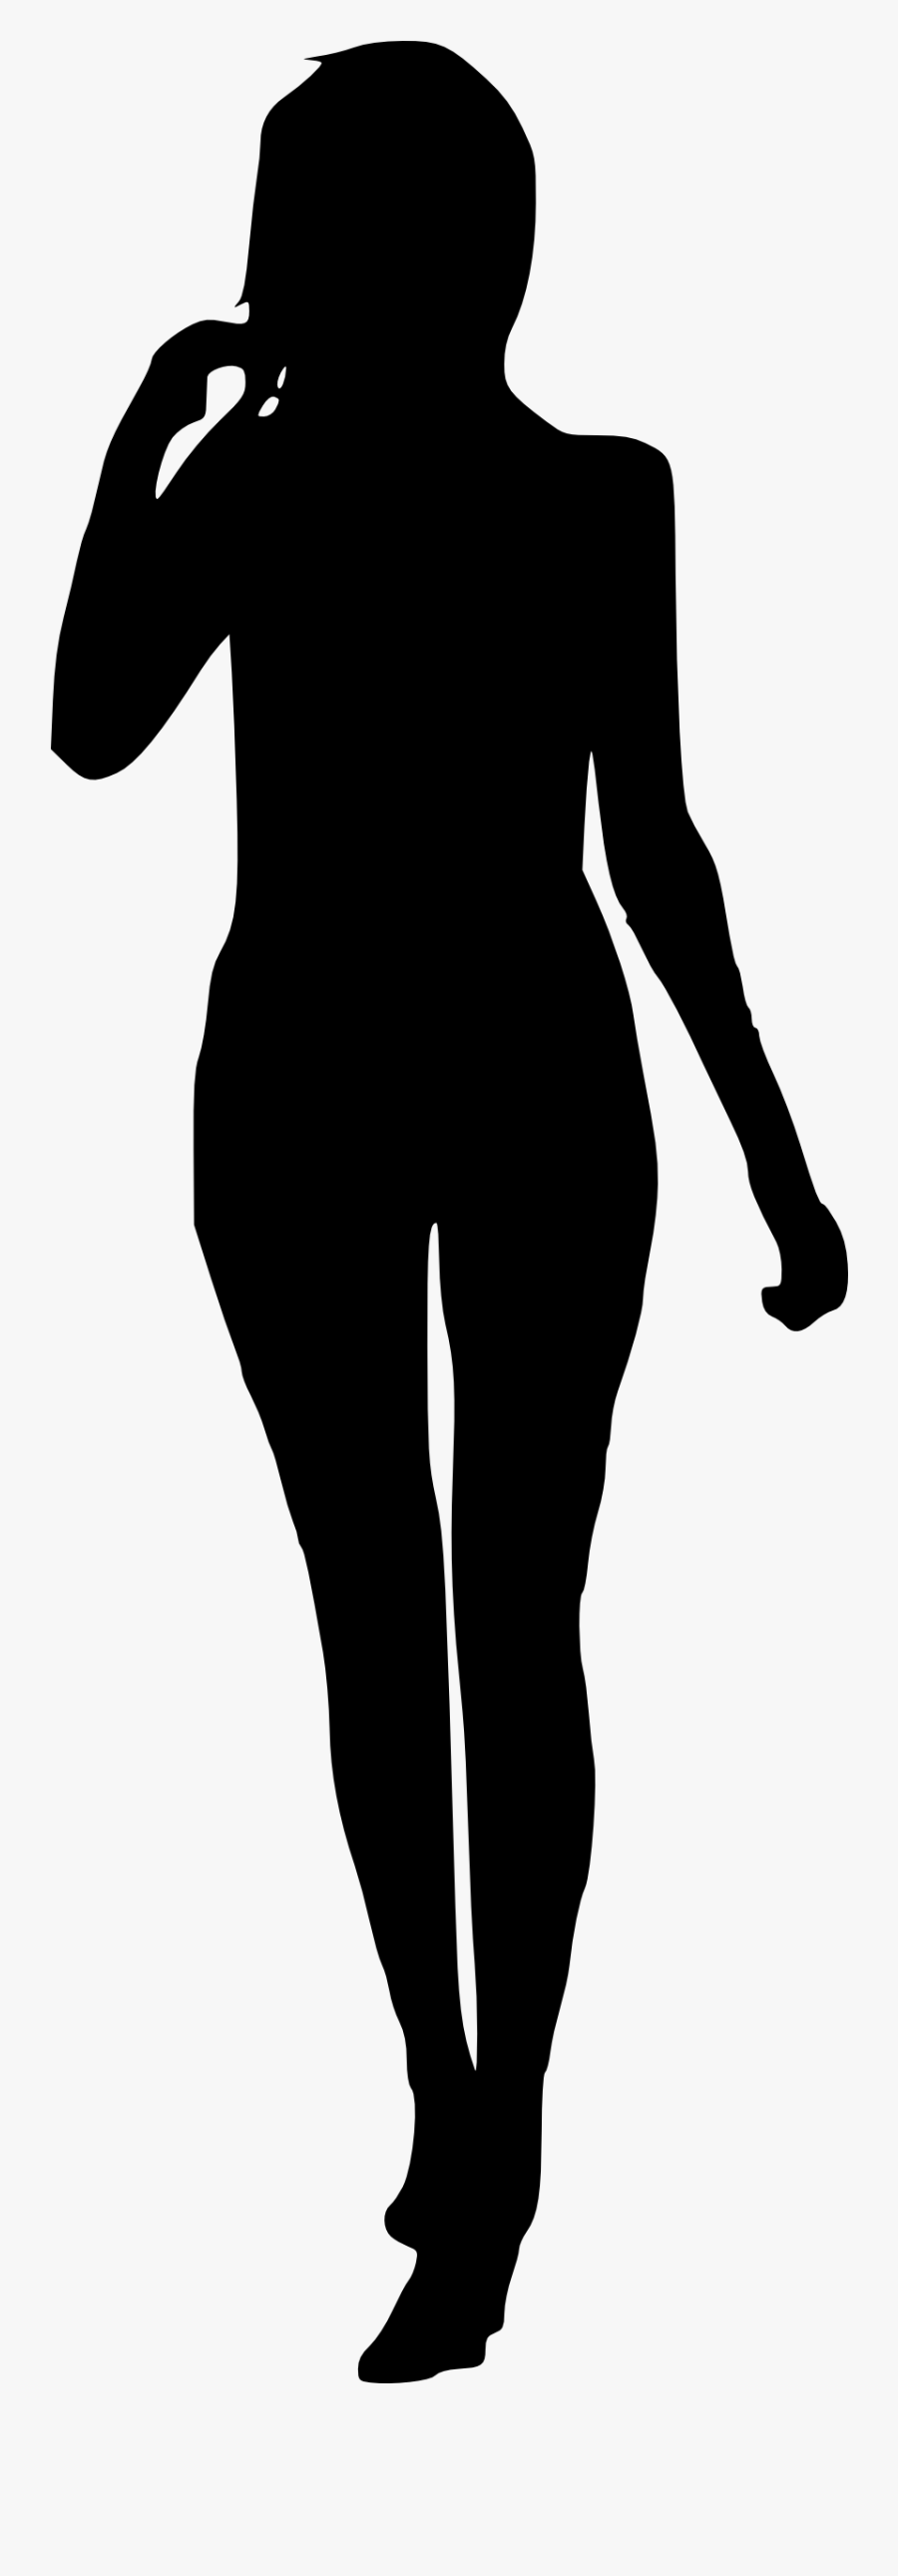 Clip Art Woman Silhouettes Png - Silhouette Of A Woman Png, Transparent Clipart